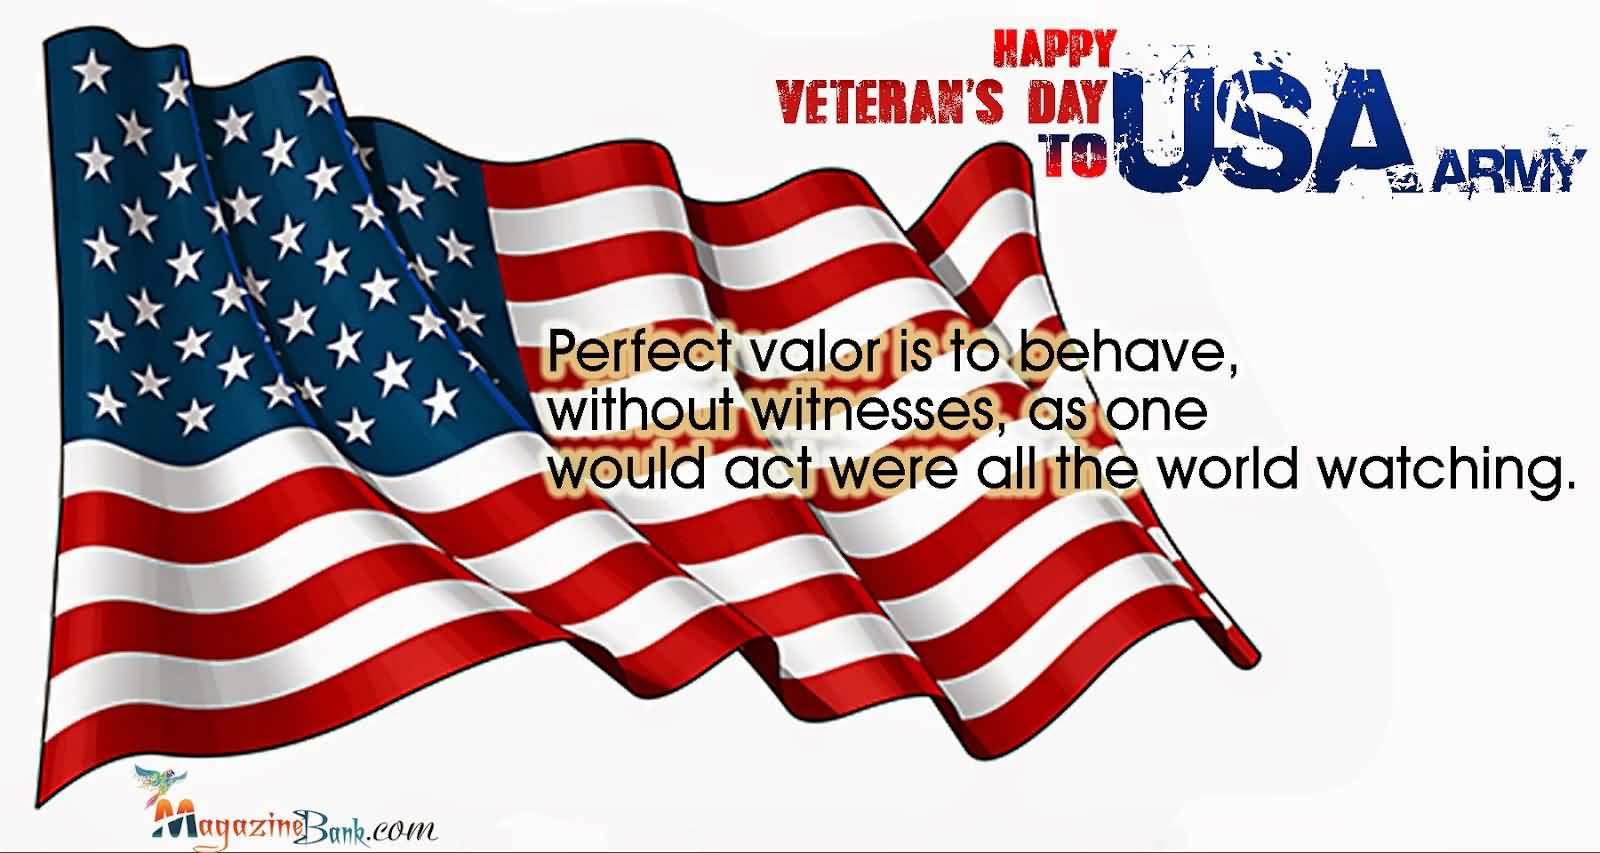 Perfect valor is to behave without witnesses as one would act were all the world watching Happy Veterans Day